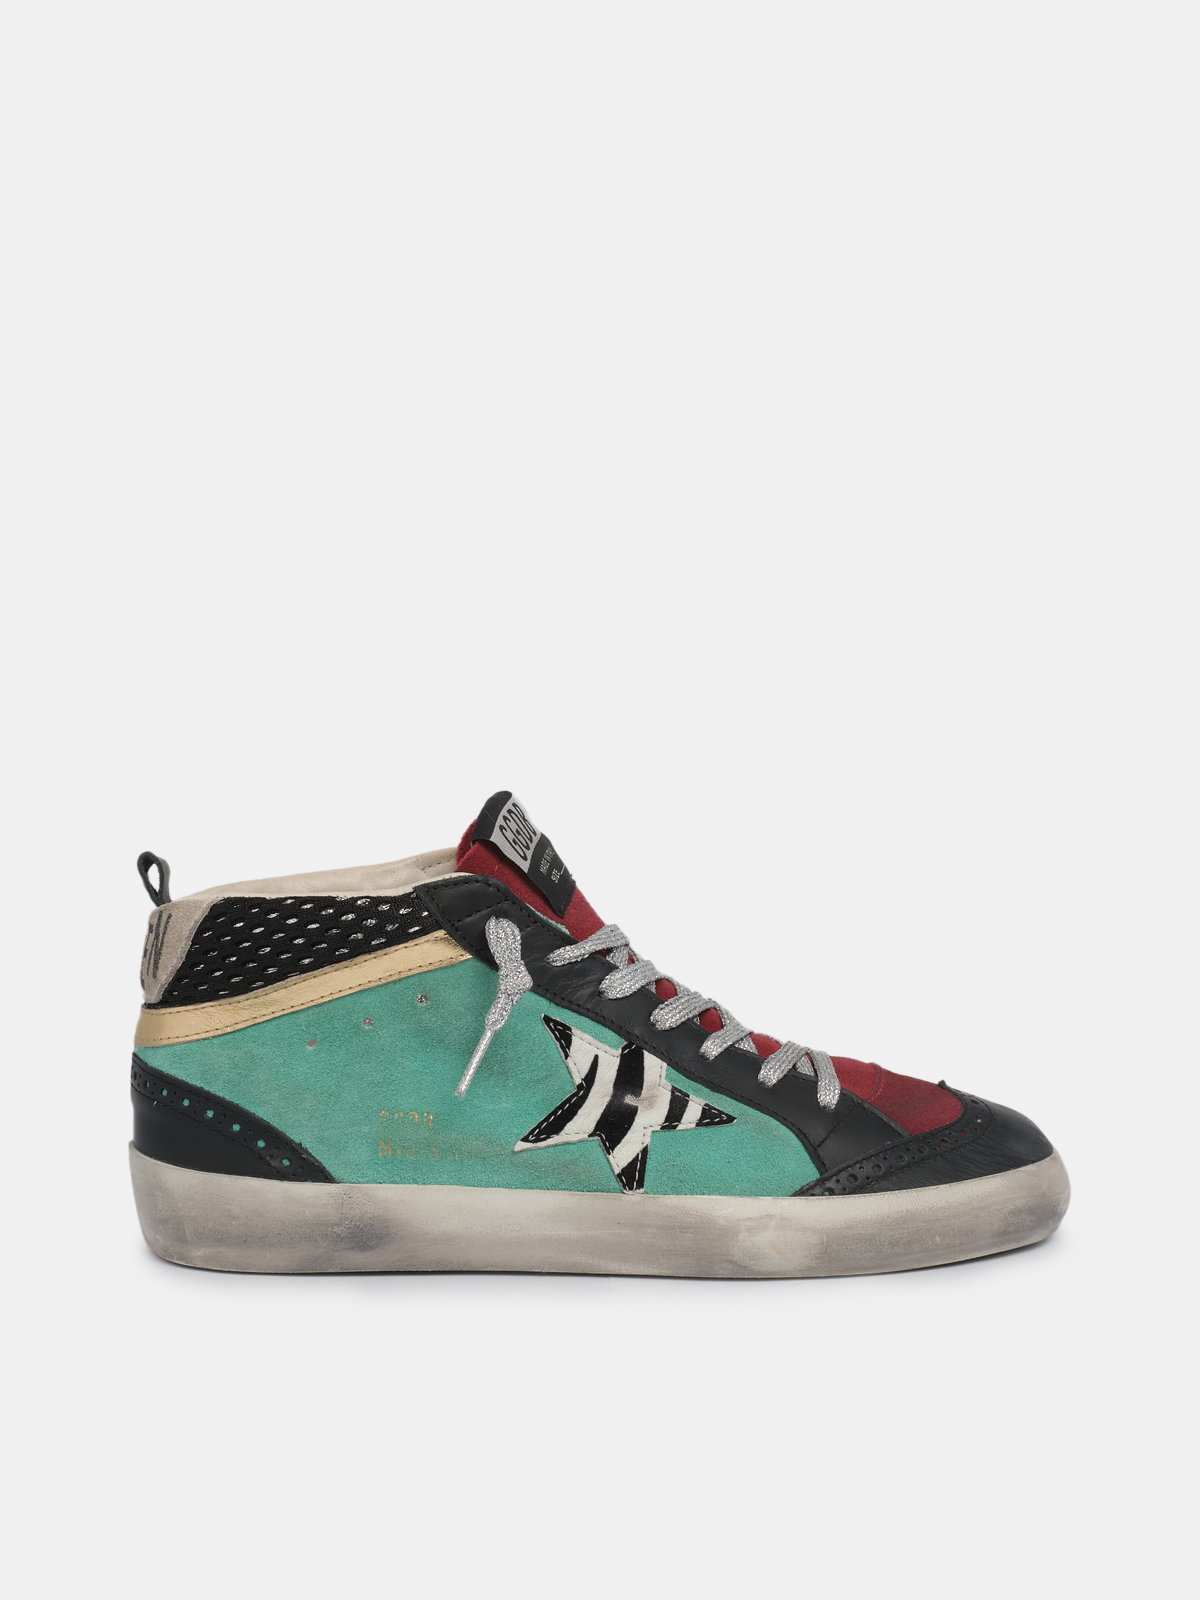 Mid Star sneakers with aqua green suede upper and zebra-print 